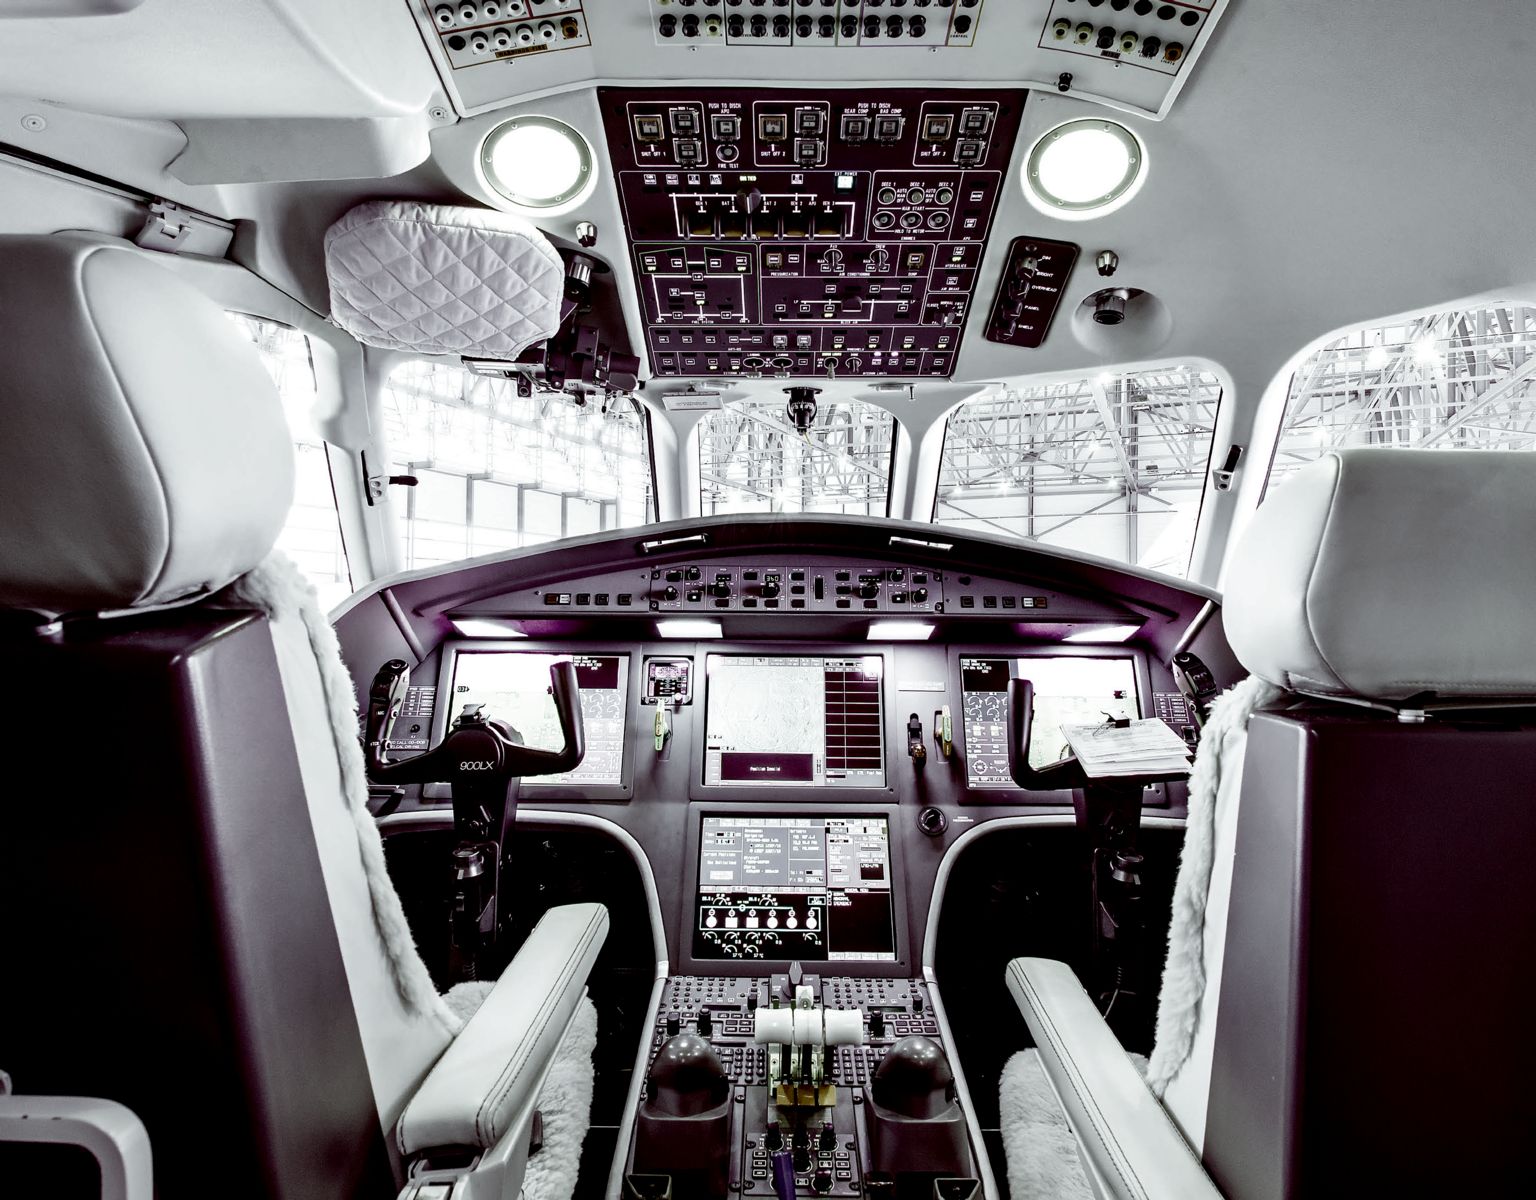 Dassault Falcon 900LX  S/N 288 for sale | gallery image: /userfiles/images/F900LX%20SN%20288/900lx_sn288_21.jpg